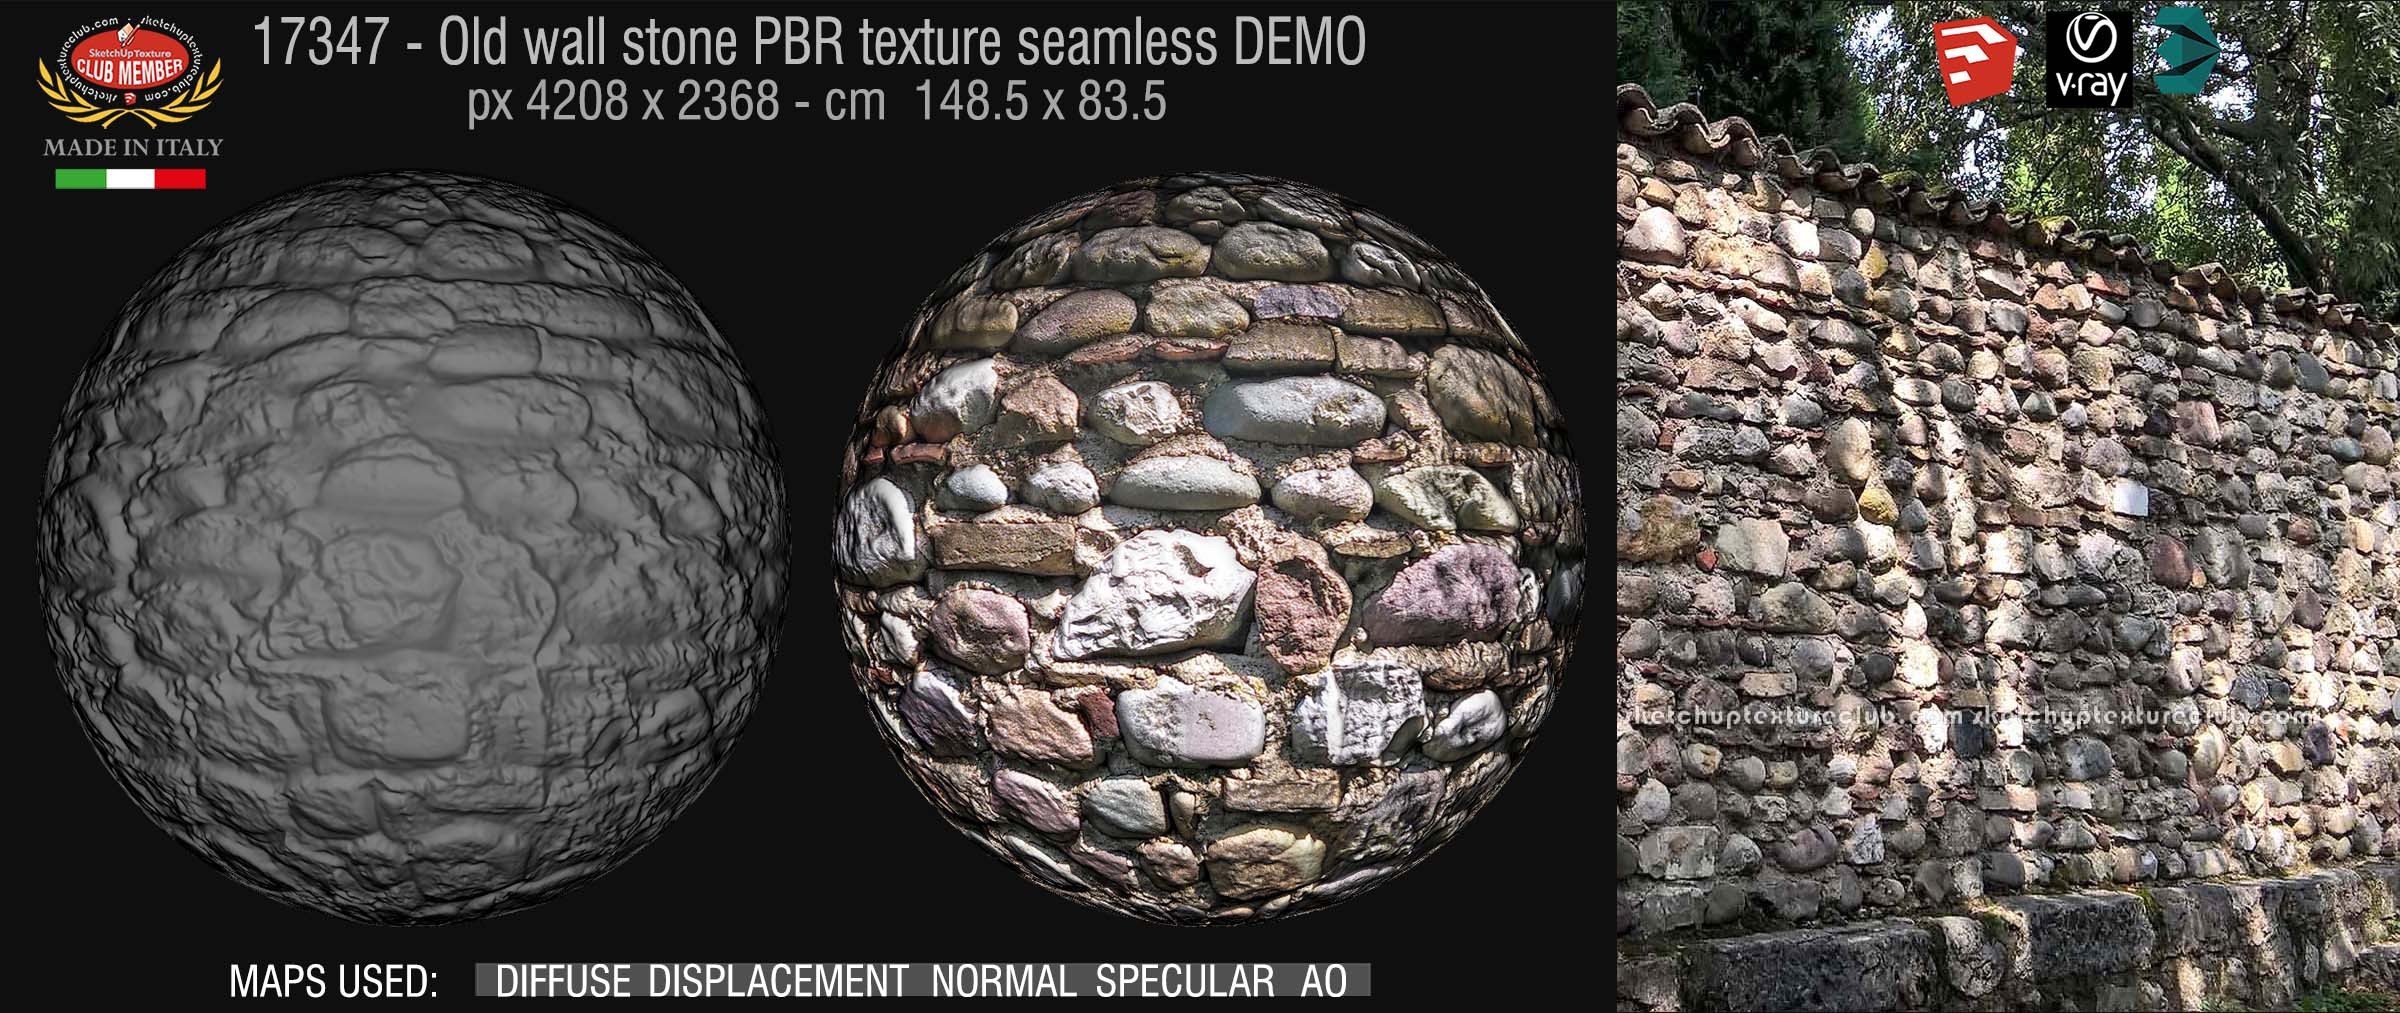 210_Italy Old wall stone texture seamless DEMO